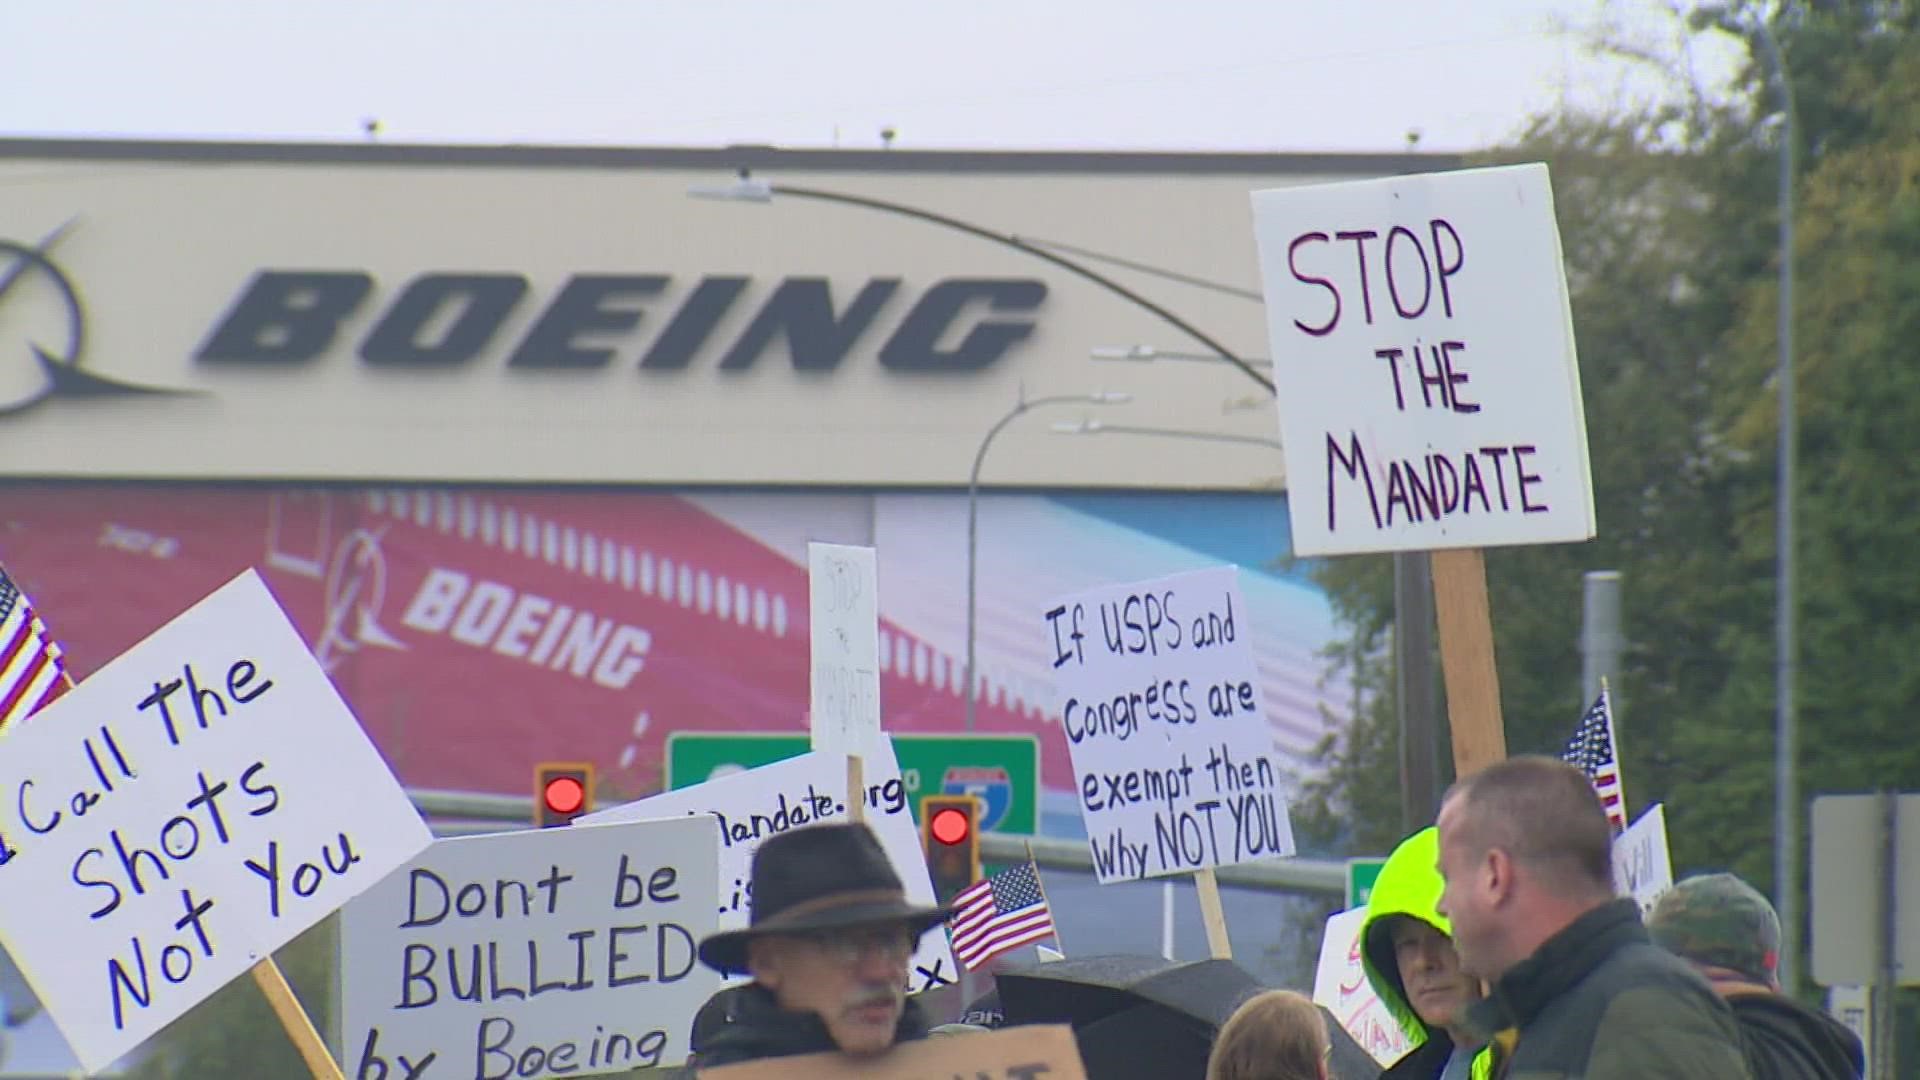 Boeing workers face a Dec. 8 deadline to be fully vaccinated for COVID-19 or risk losing their jobs.